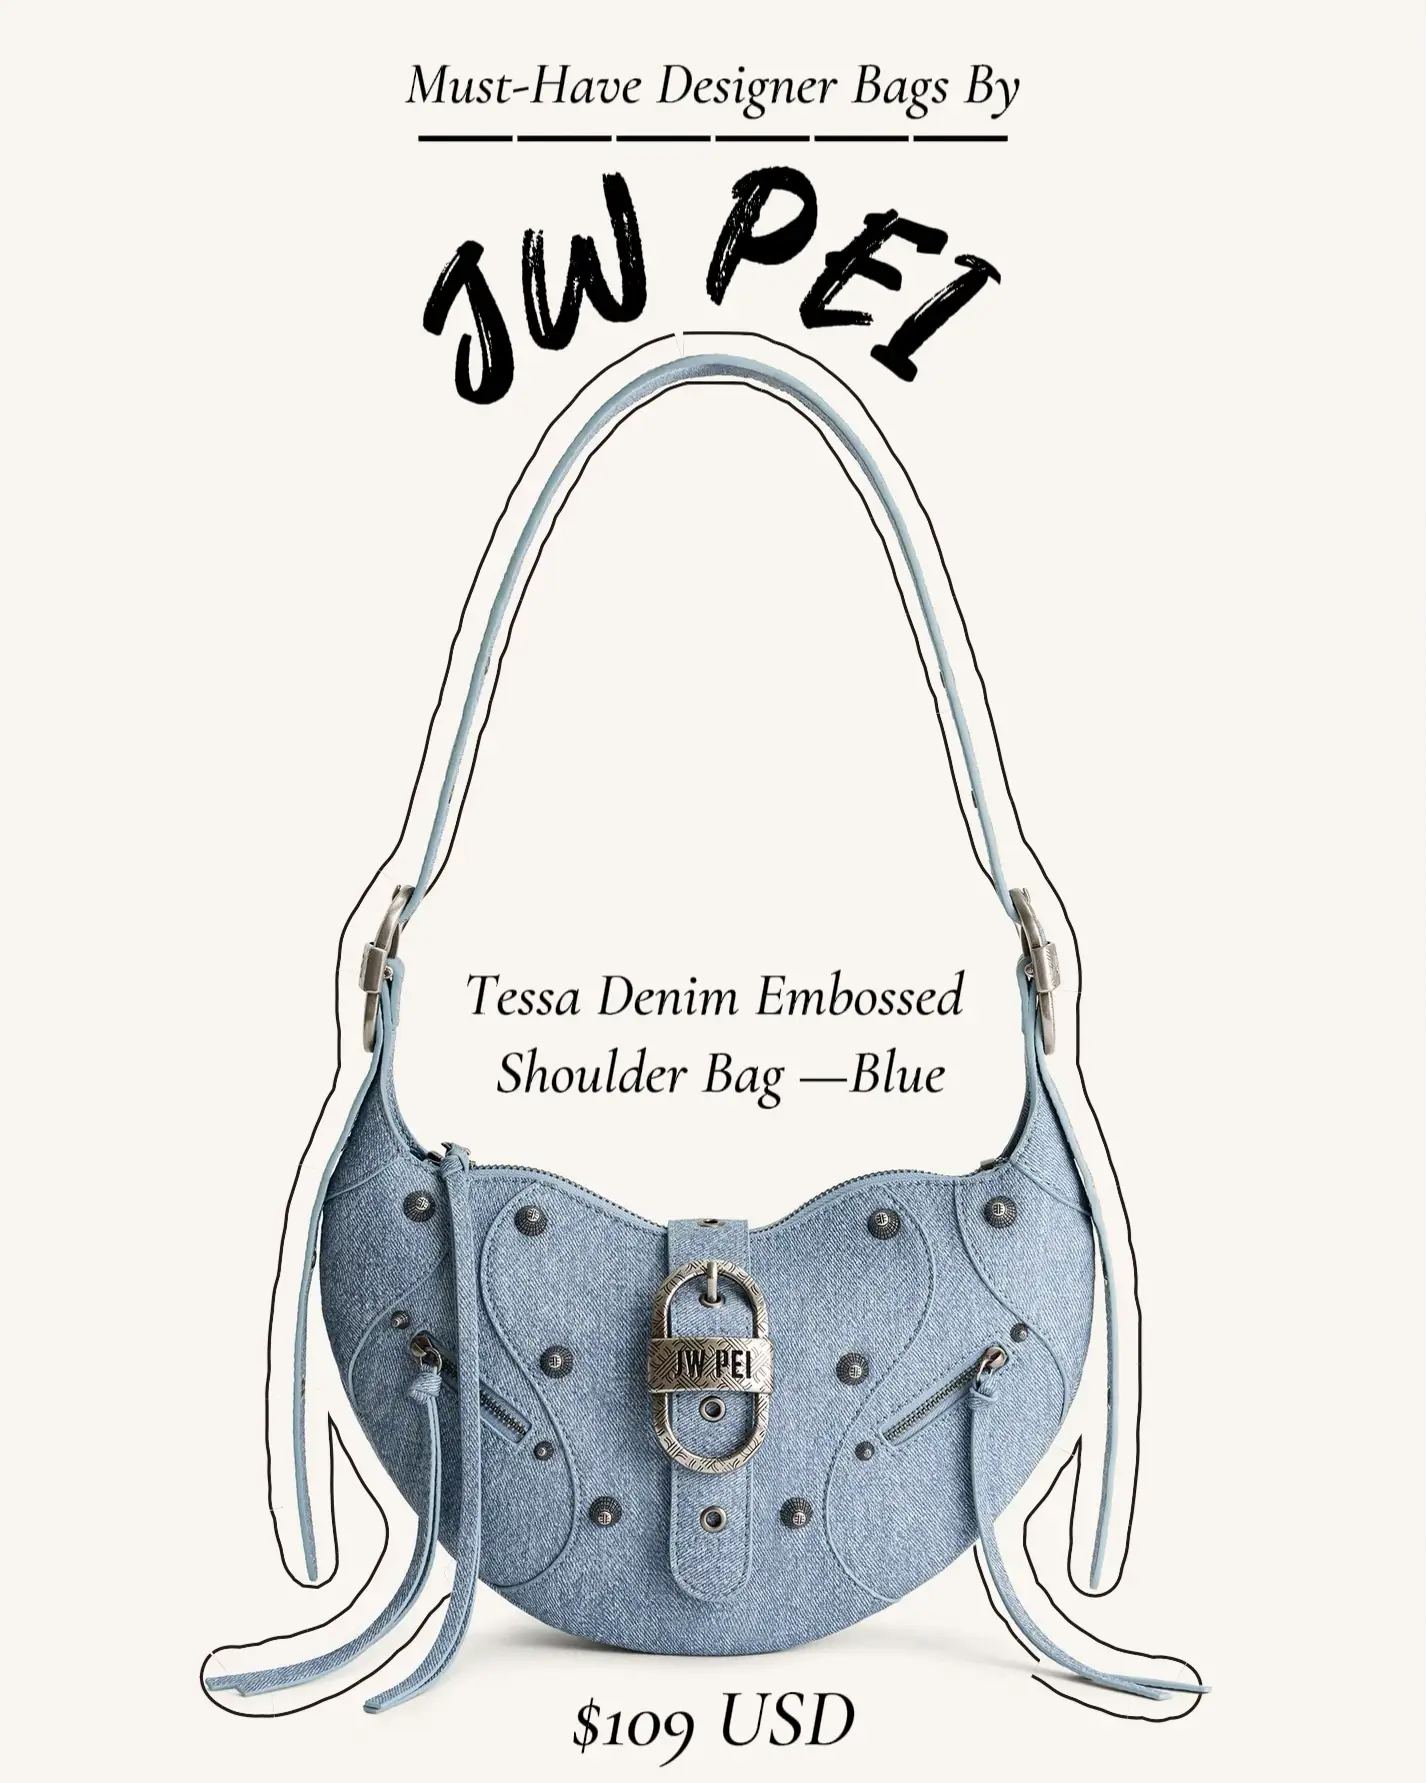 JW Pei From  Makes Affordable Bags That Look Designer